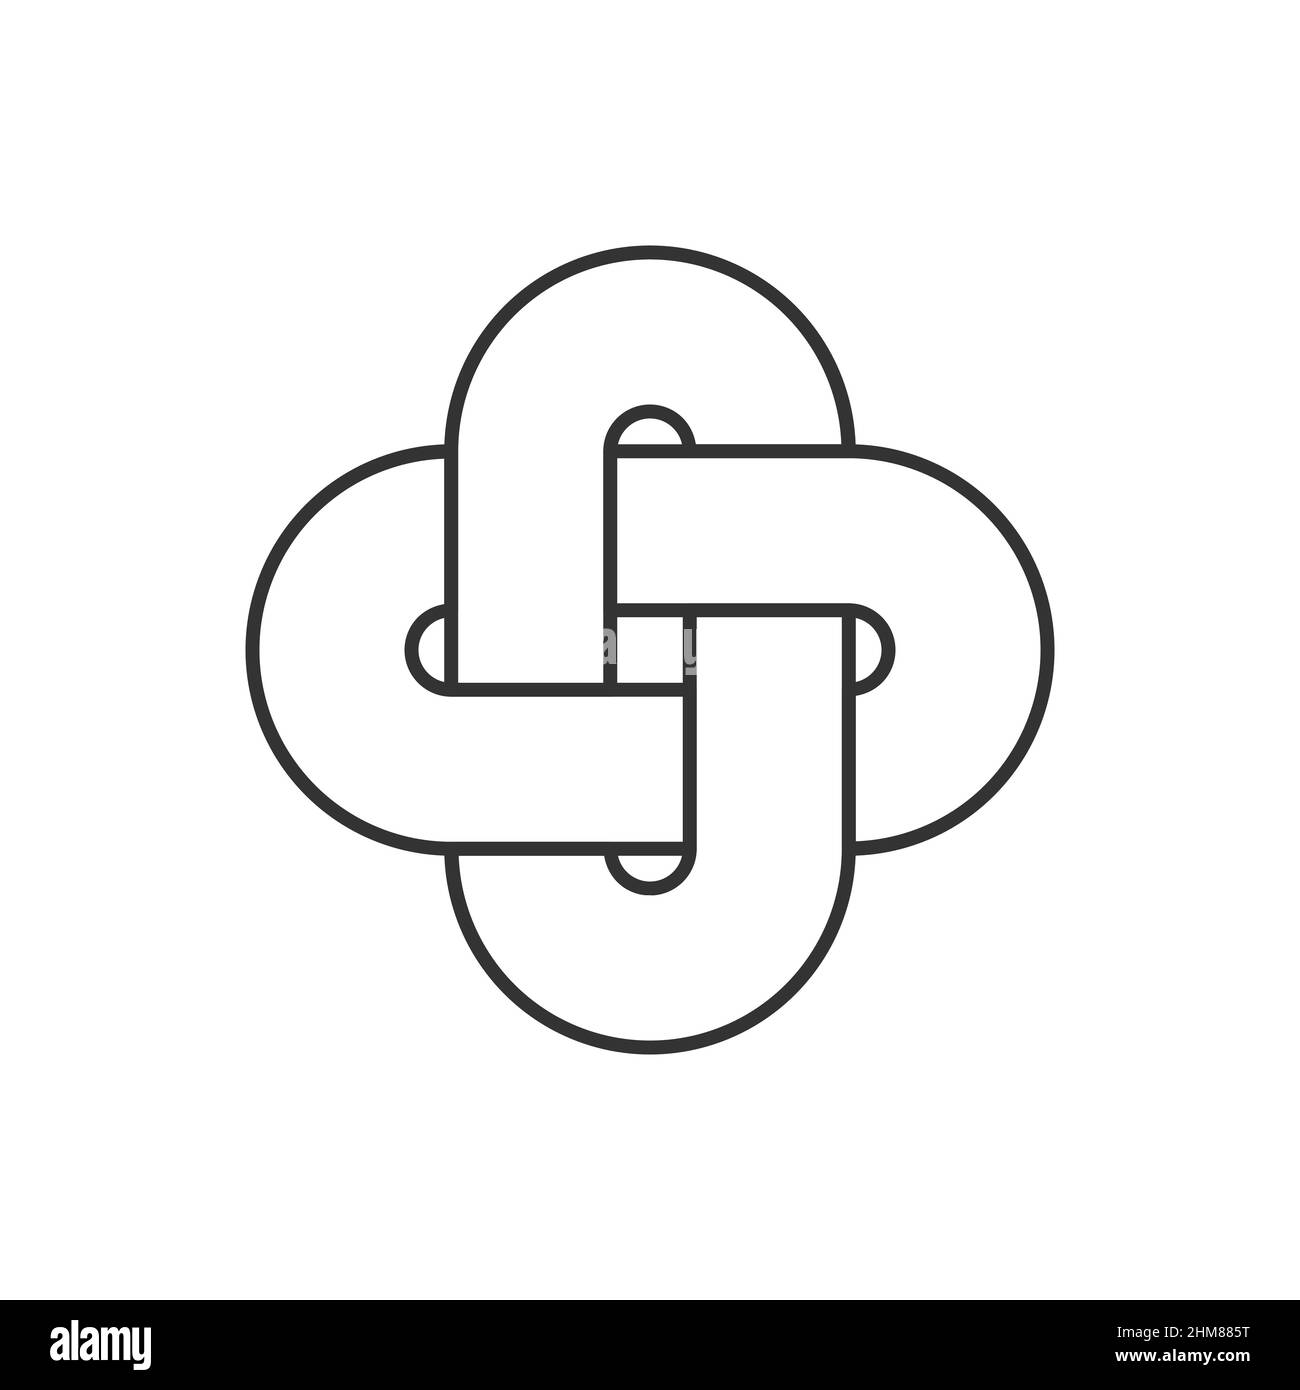 Simple Solomon's knot. Ancient celtic knot icon. Interlaced loops as a symbol of eternity. Decorative endless intertwined motif. Infinity idea. Vector Stock Vector